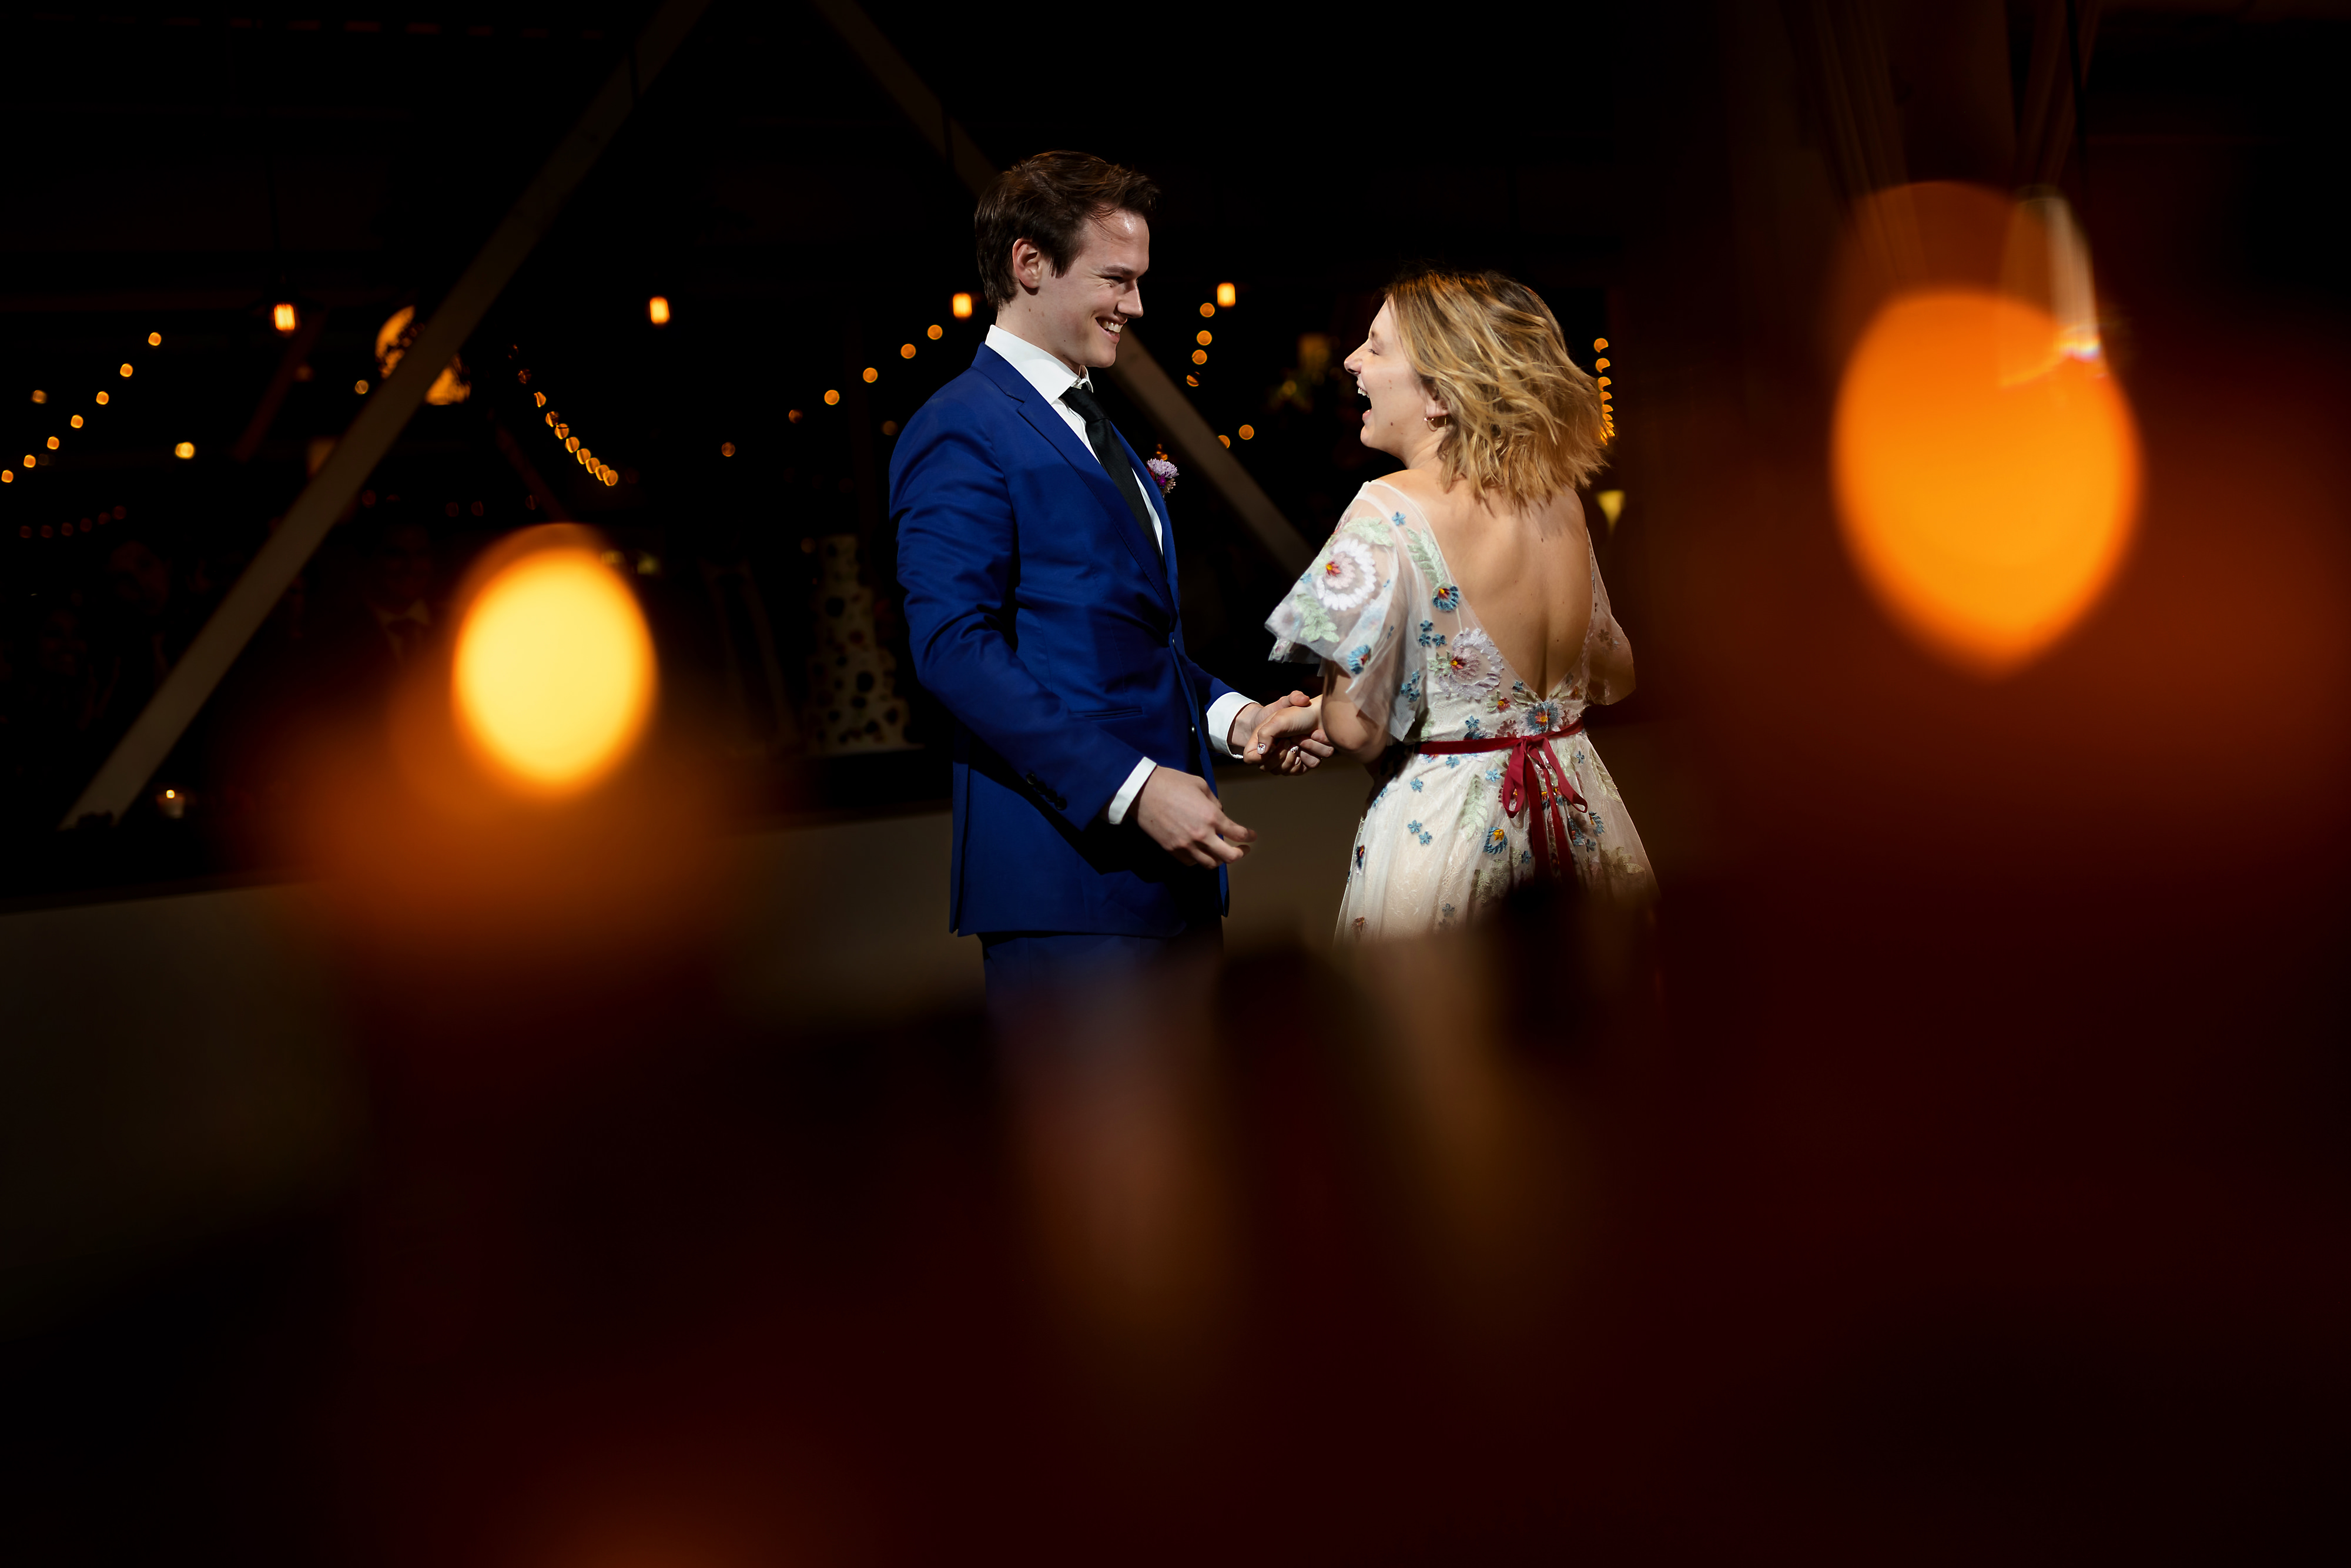 Bride and groom first dance with candles in the forground during wedding reception at Greenhouse Loft in Chicago